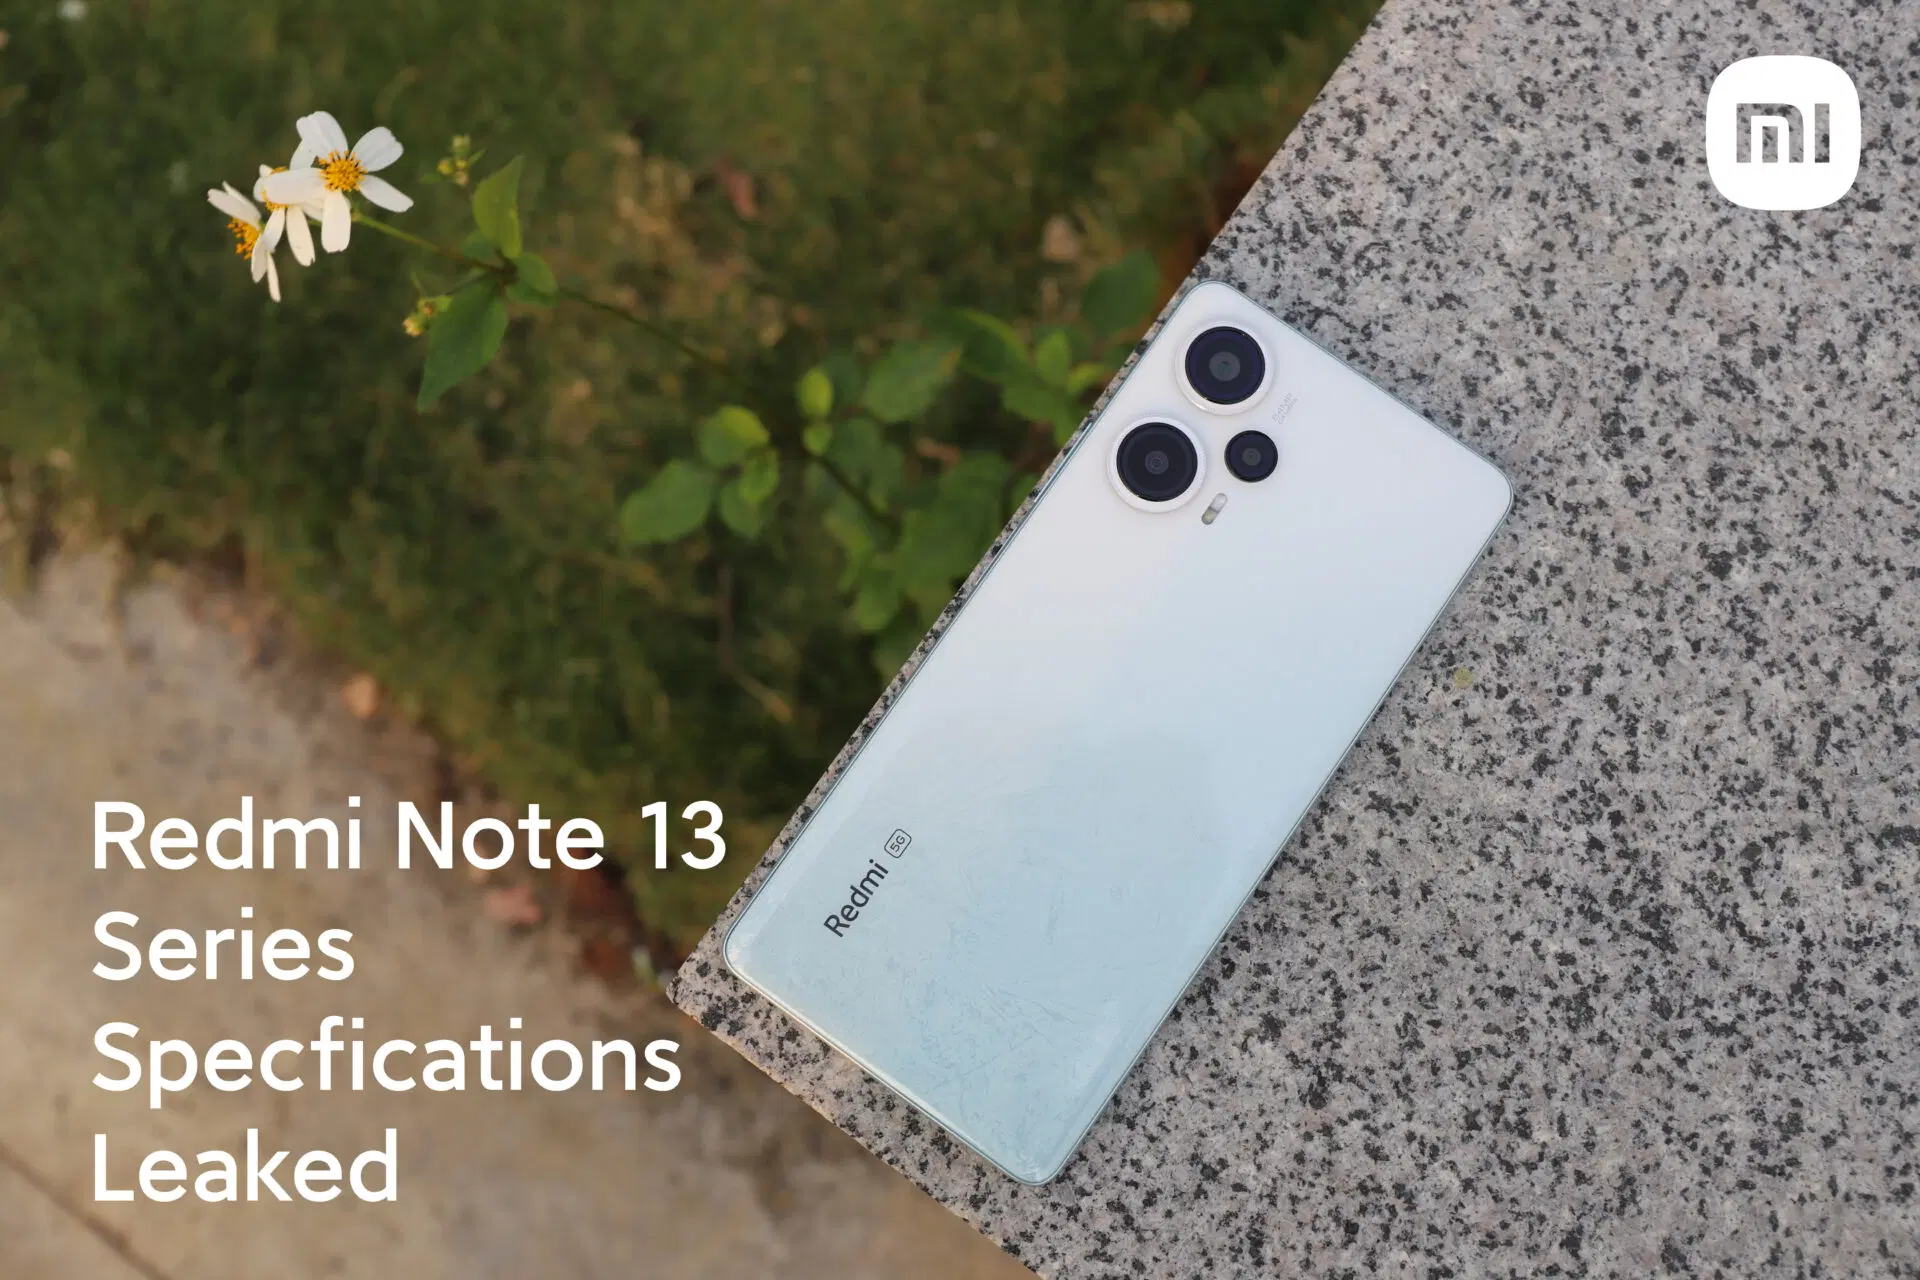 Redmi-Note-13-series-features-leaked-here-are-all-details